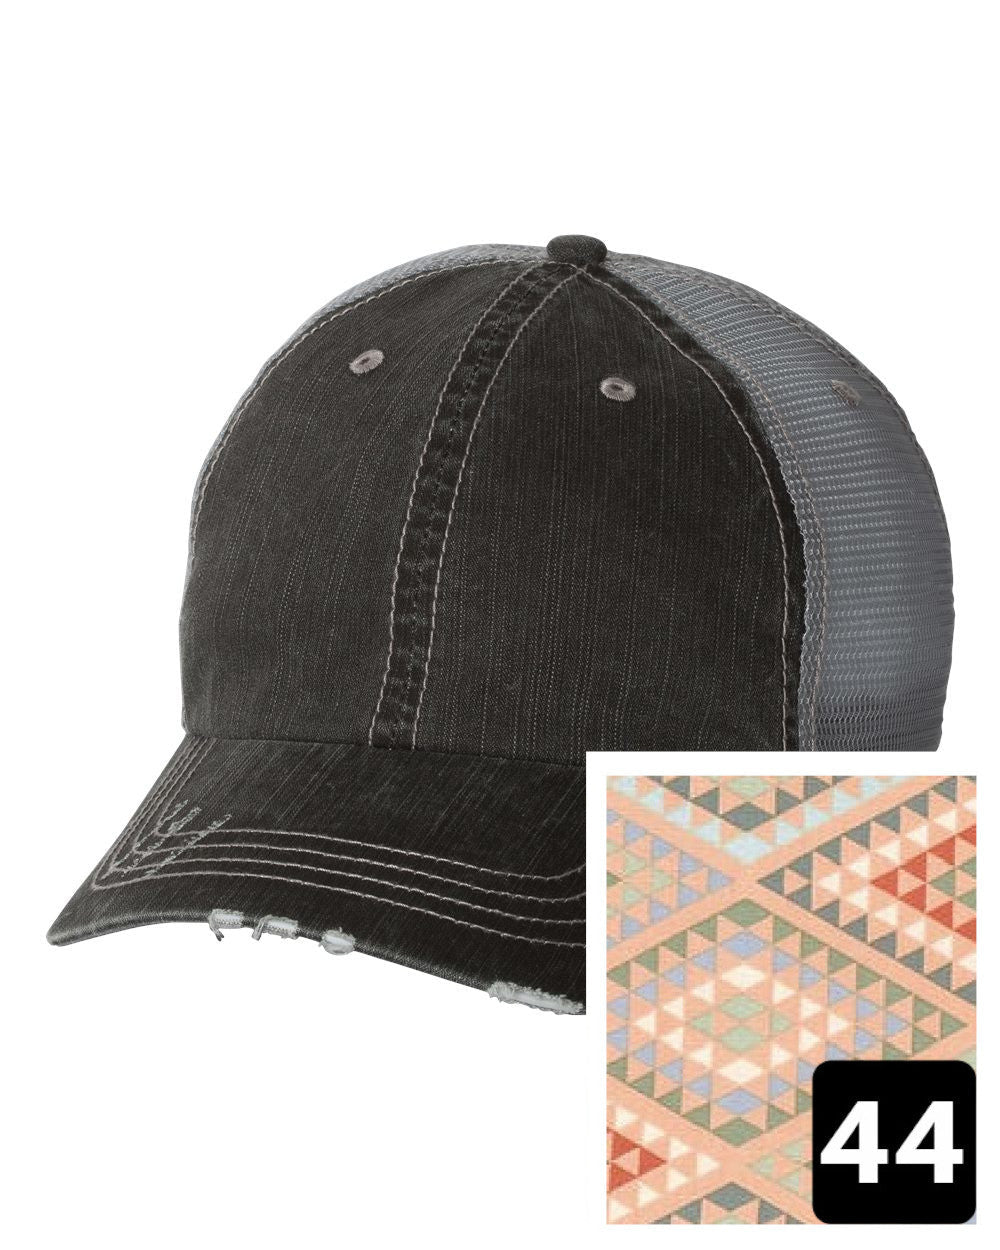 gray distressed trucker hat with navy coral and white chevron fabric state of New Mexico